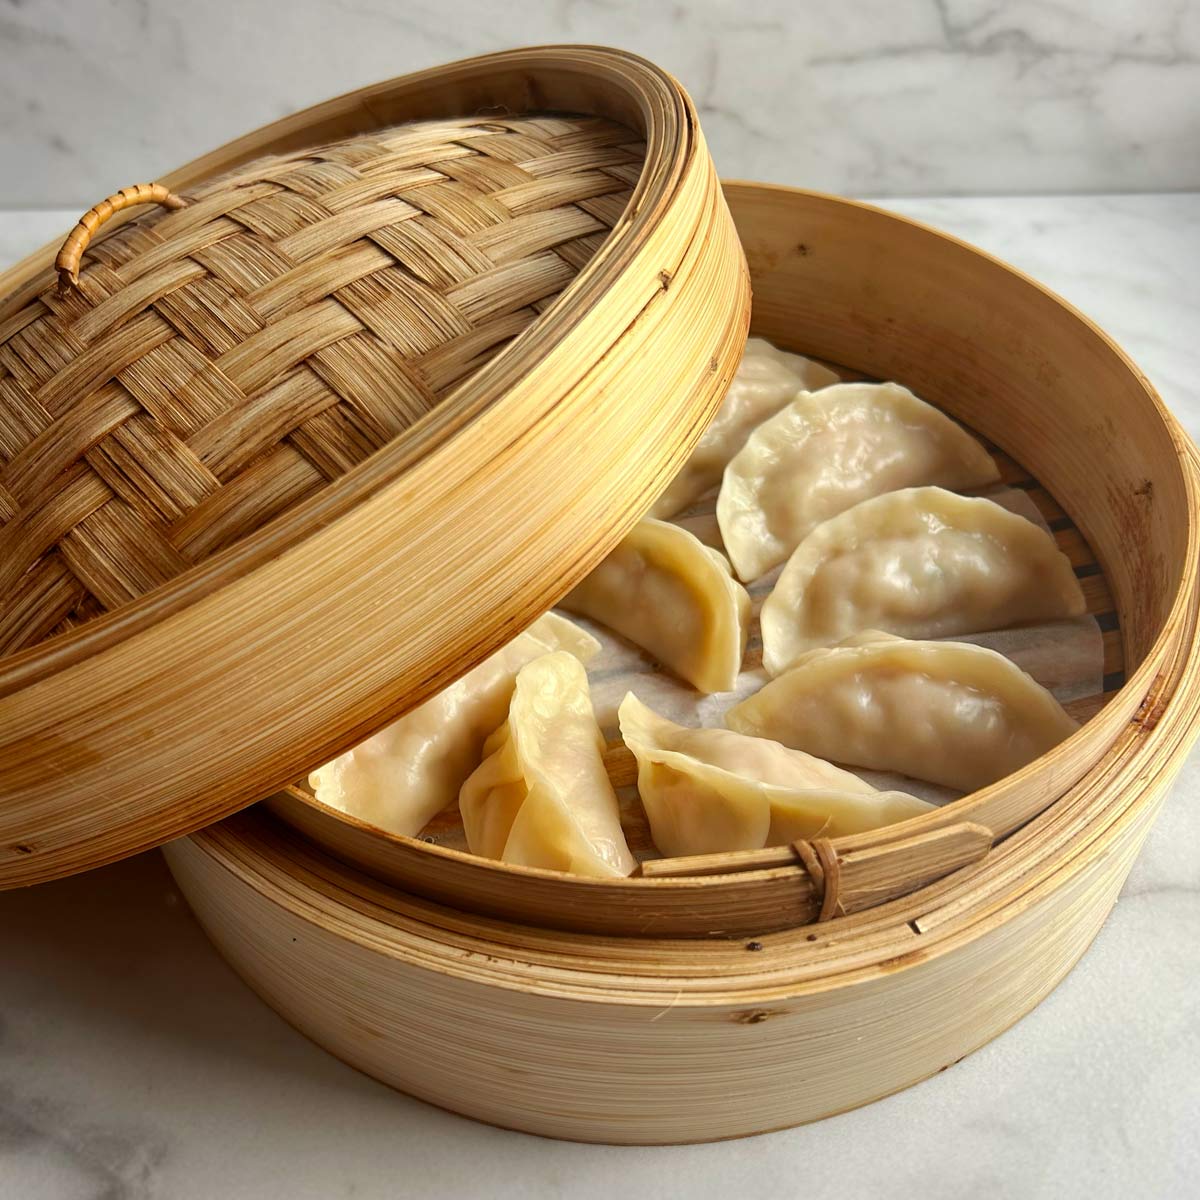 Tips for Cooking with a Bamboo Steamer